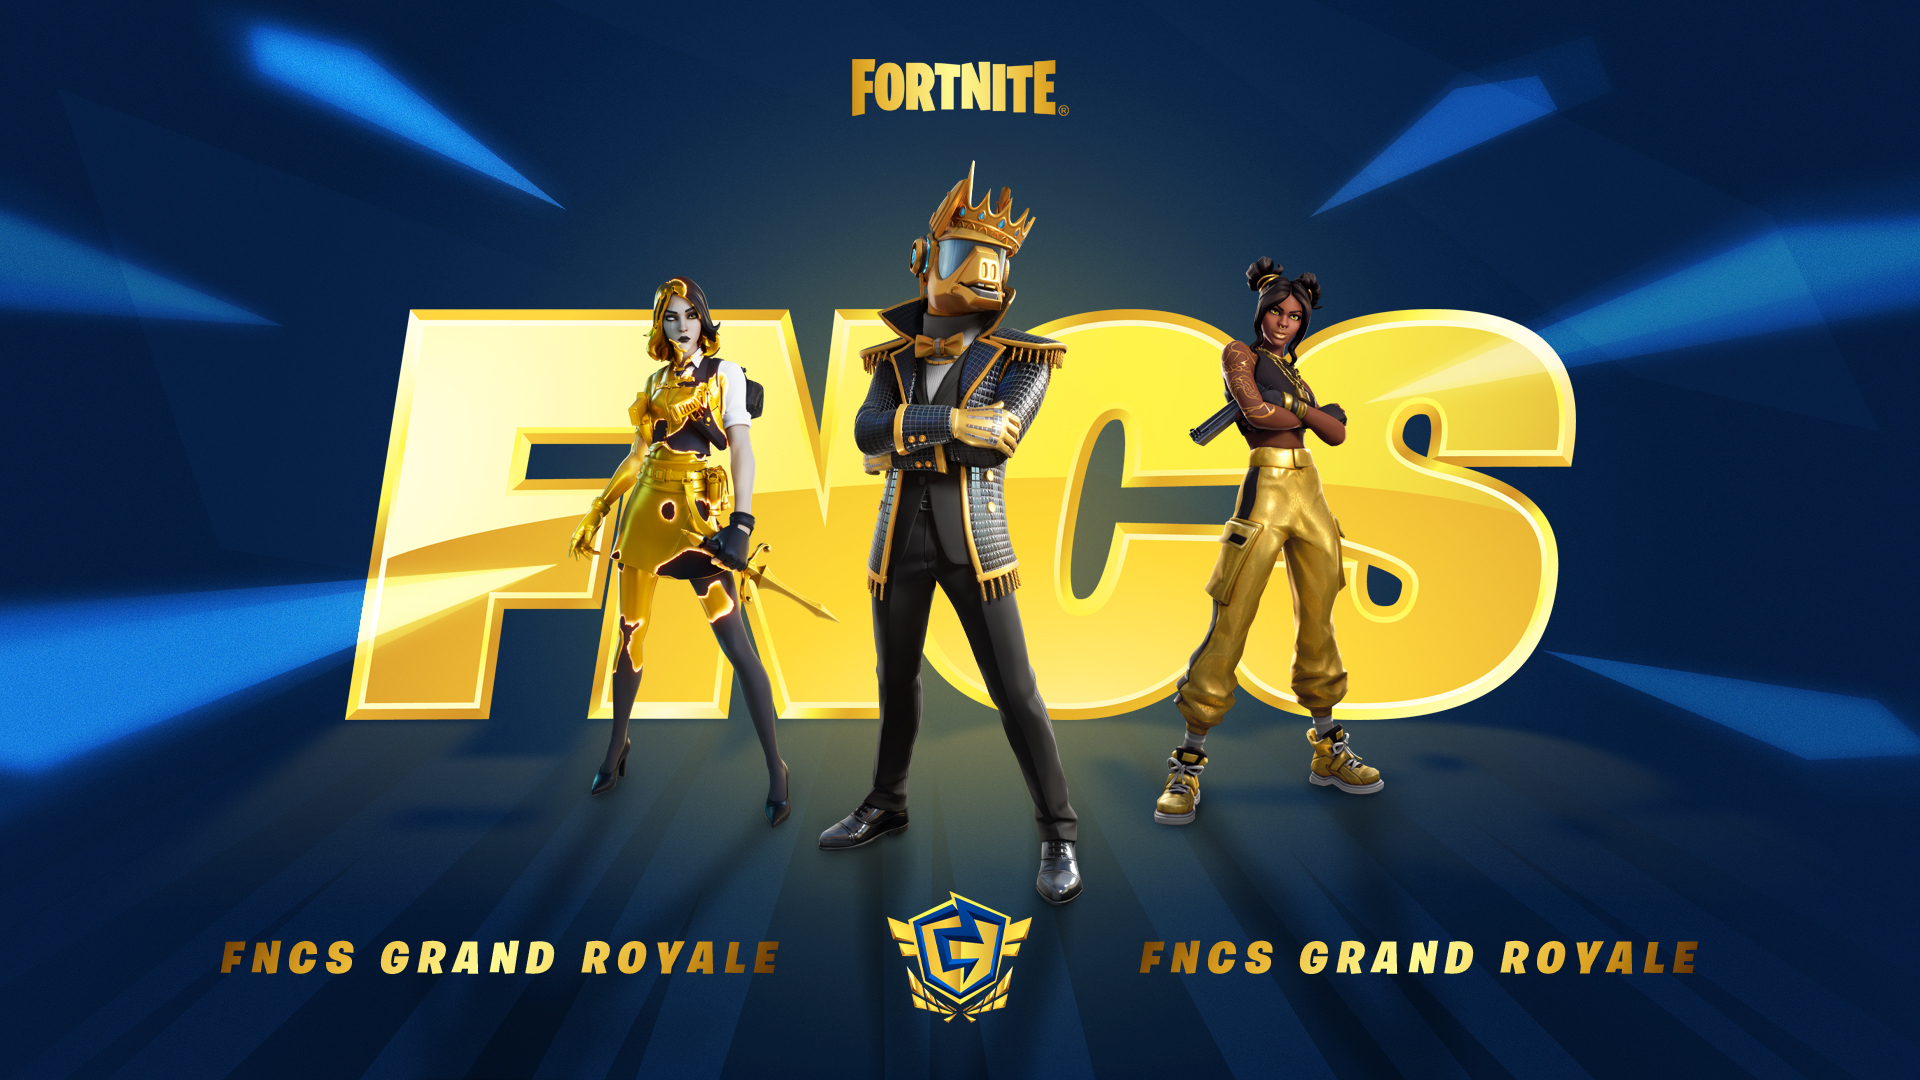 How To Watch Fortnite Grand Royale 21 Pc Gamer